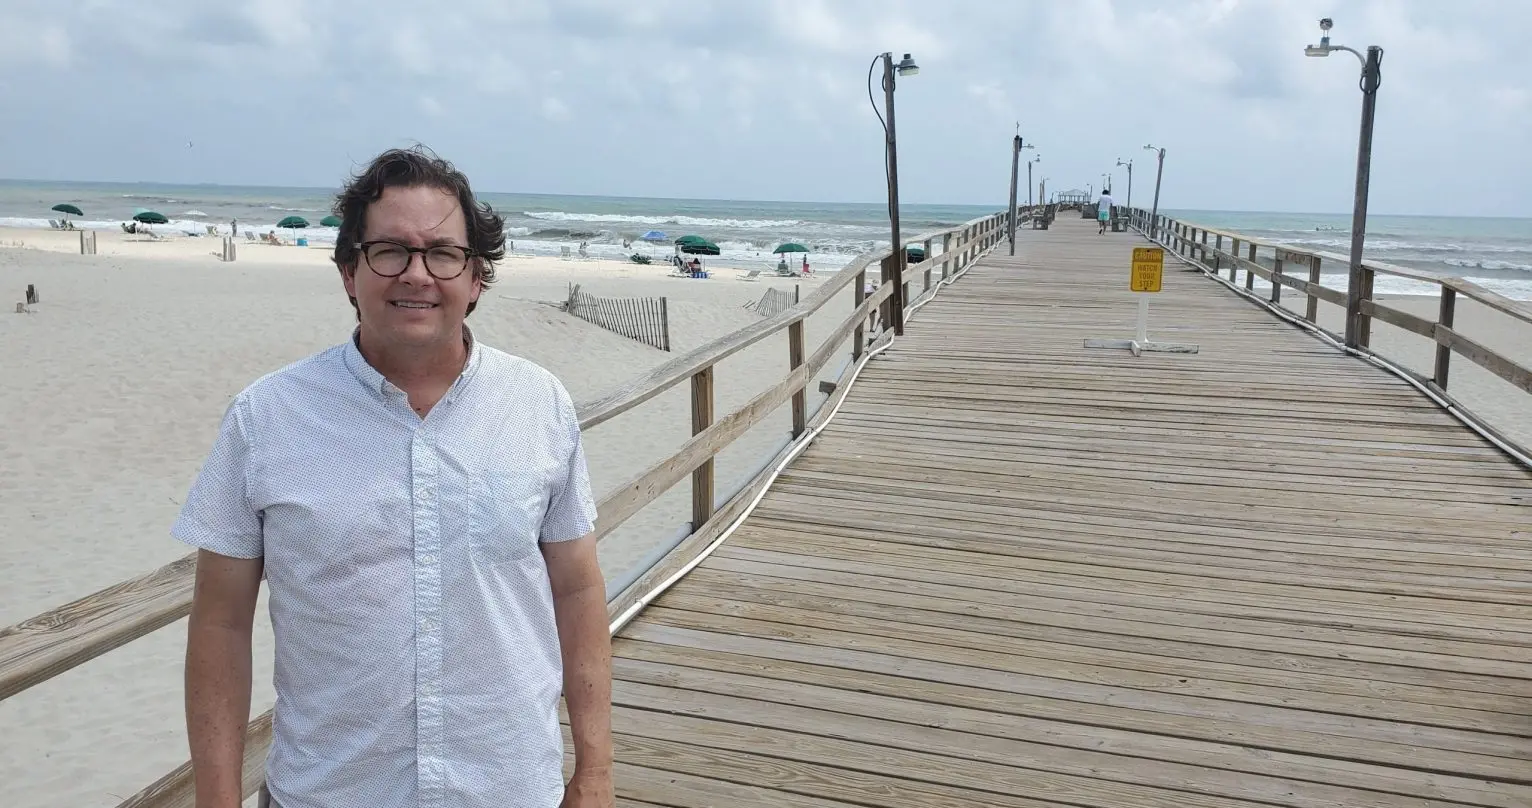 Mayor of Atlantic Beach poses in front of pier he owns